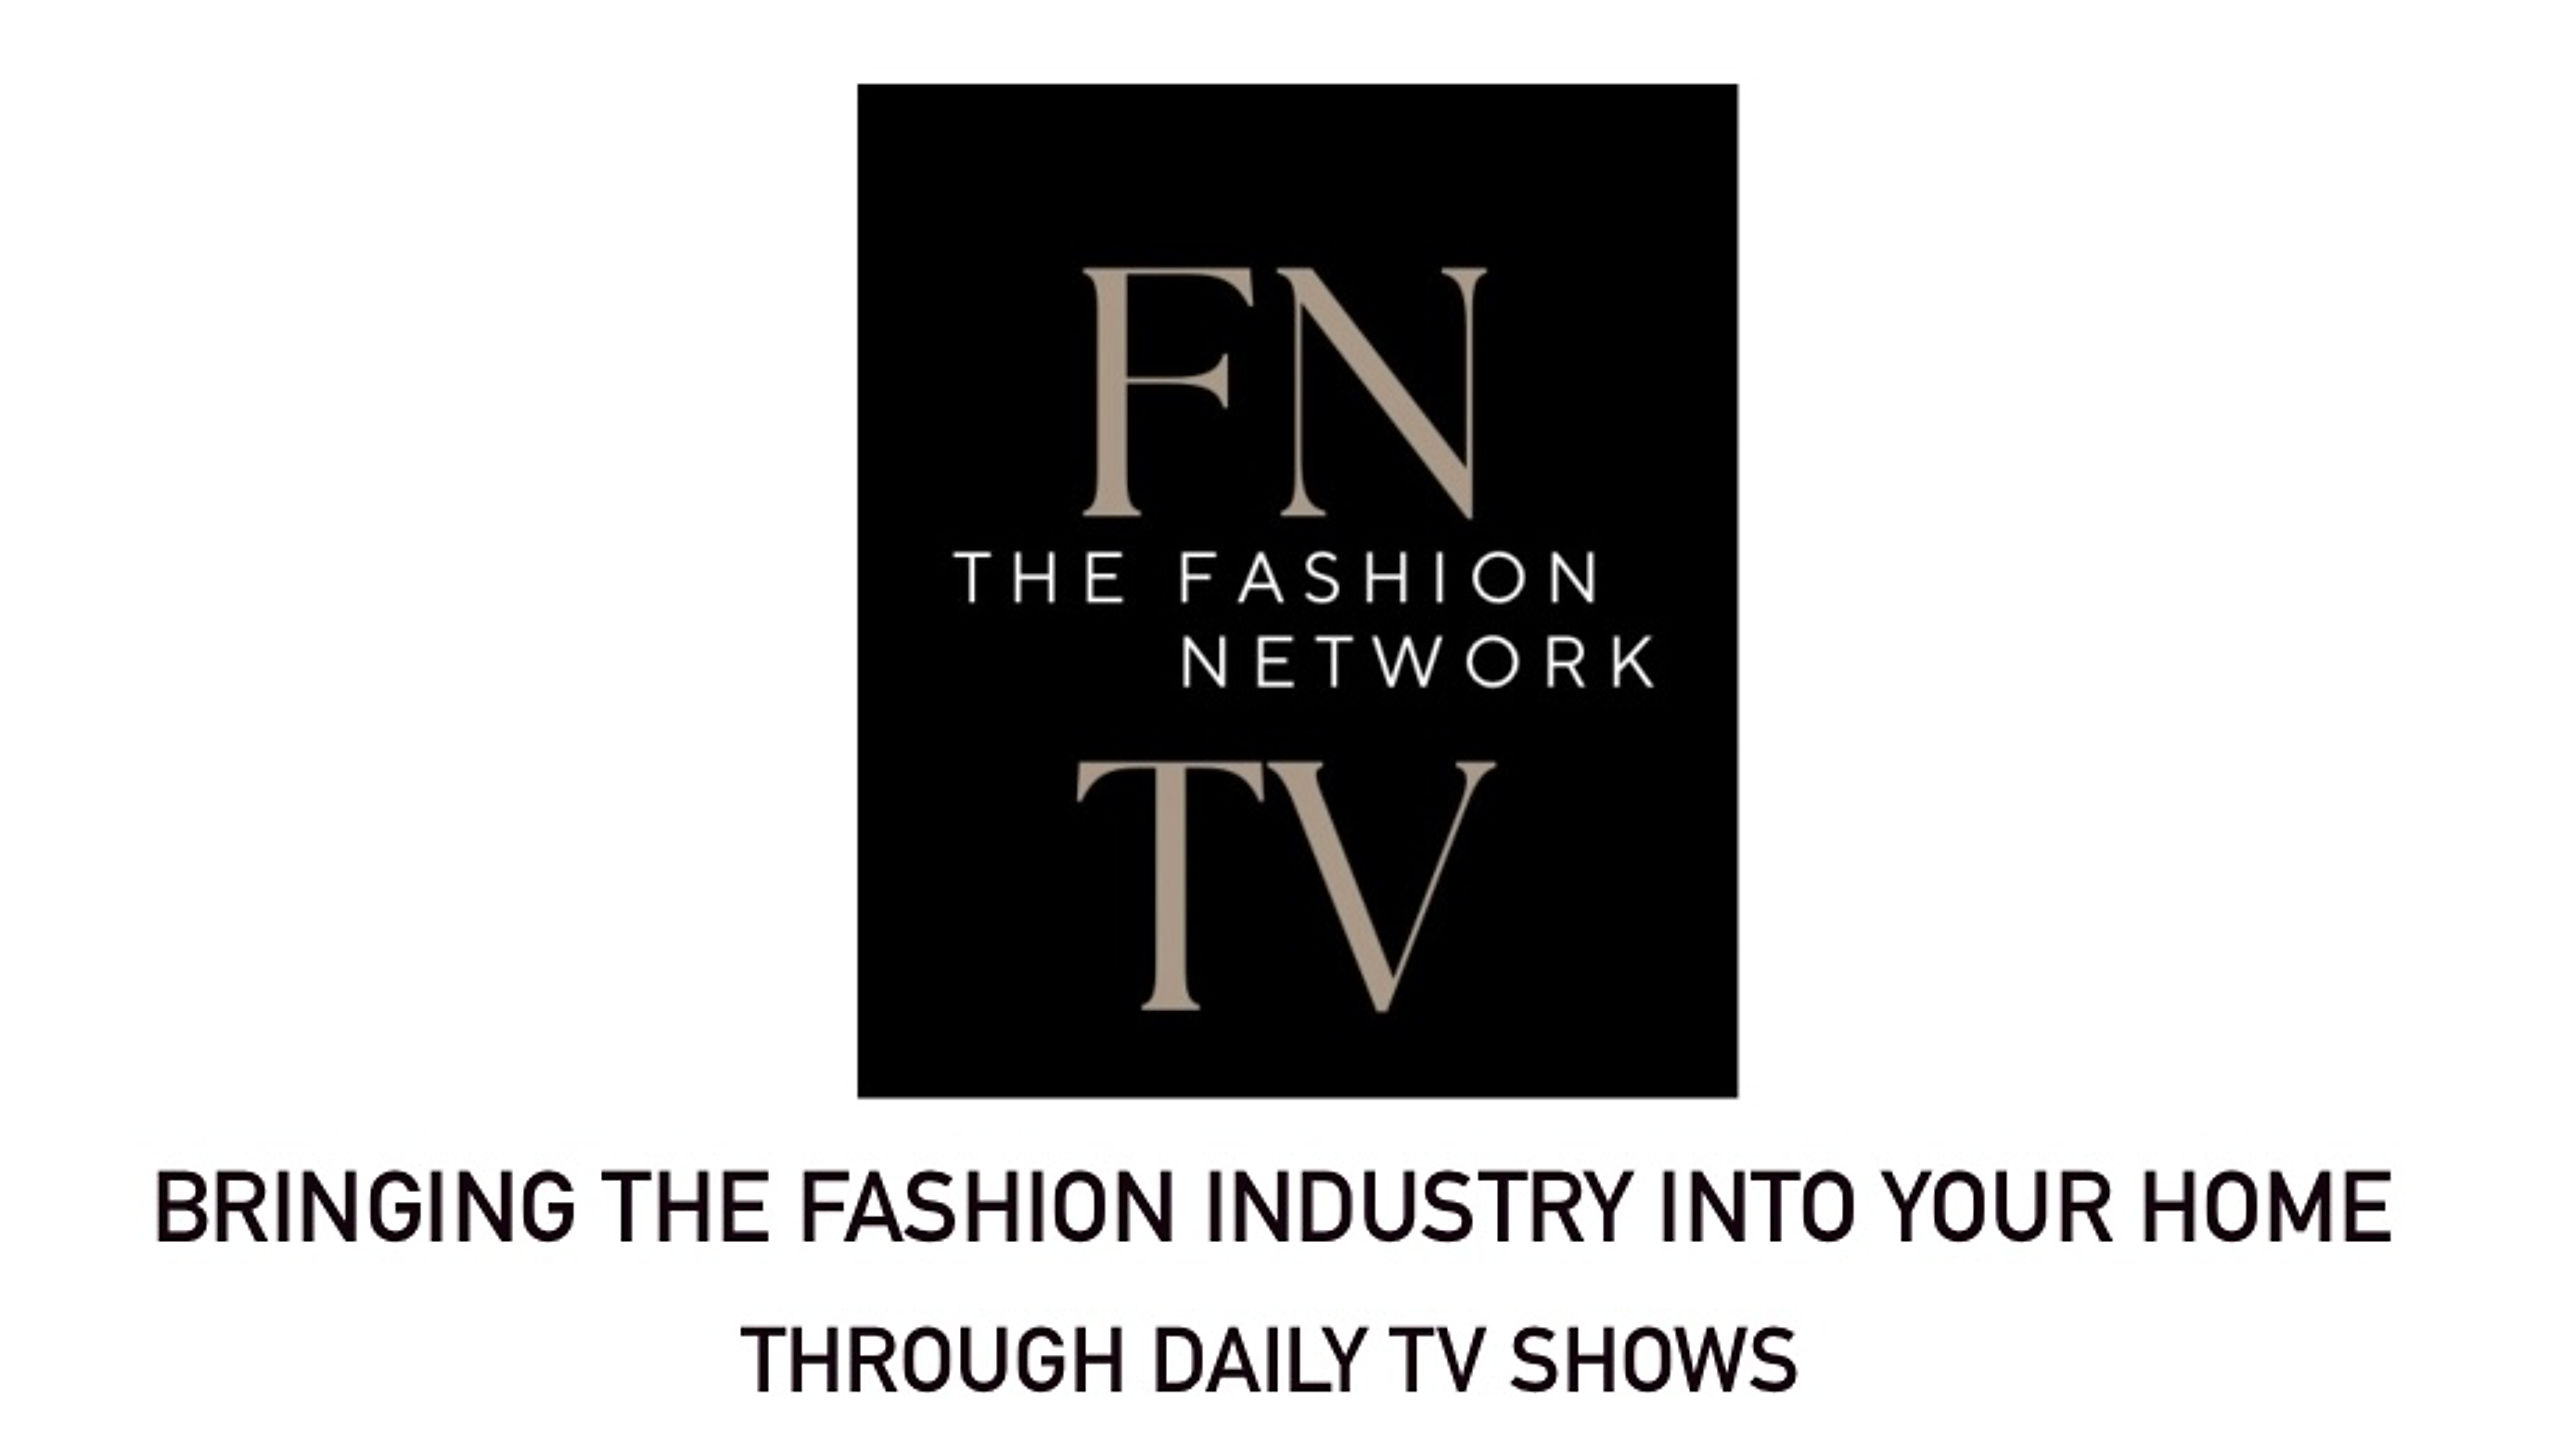 Fashionology TODAY on The Fashion Network, FNTV